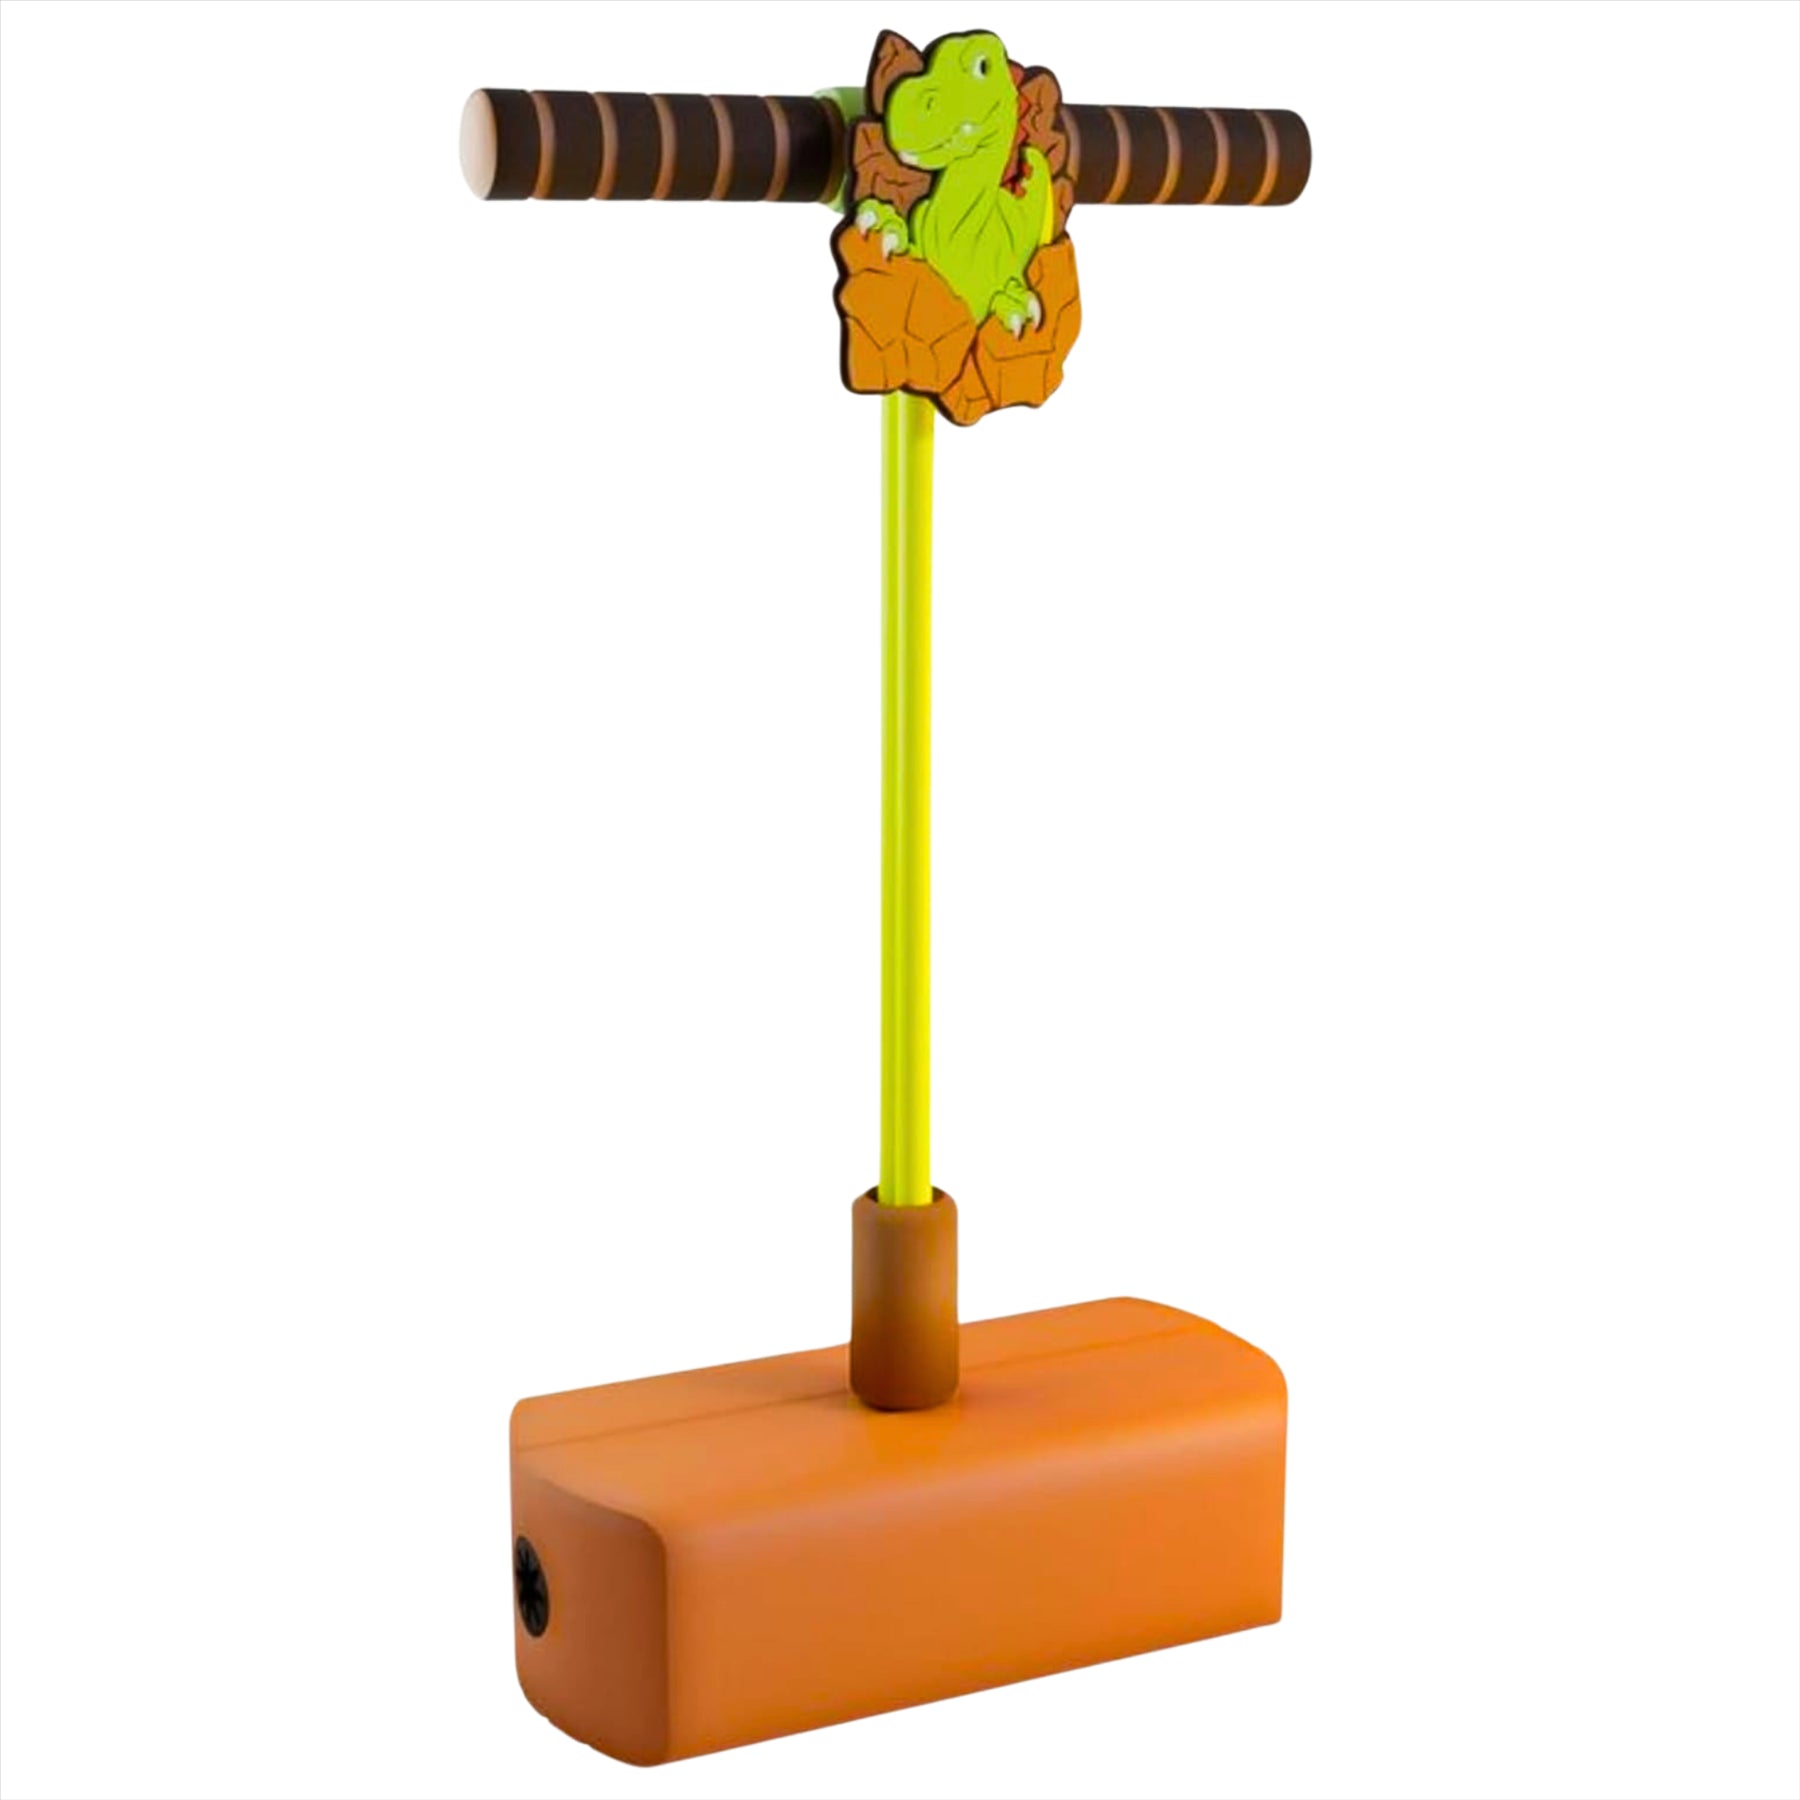 PoGo Stick Dinosaur Themed Squeaker Action Toy - Suitable for Ages 3+ - Toptoys2u